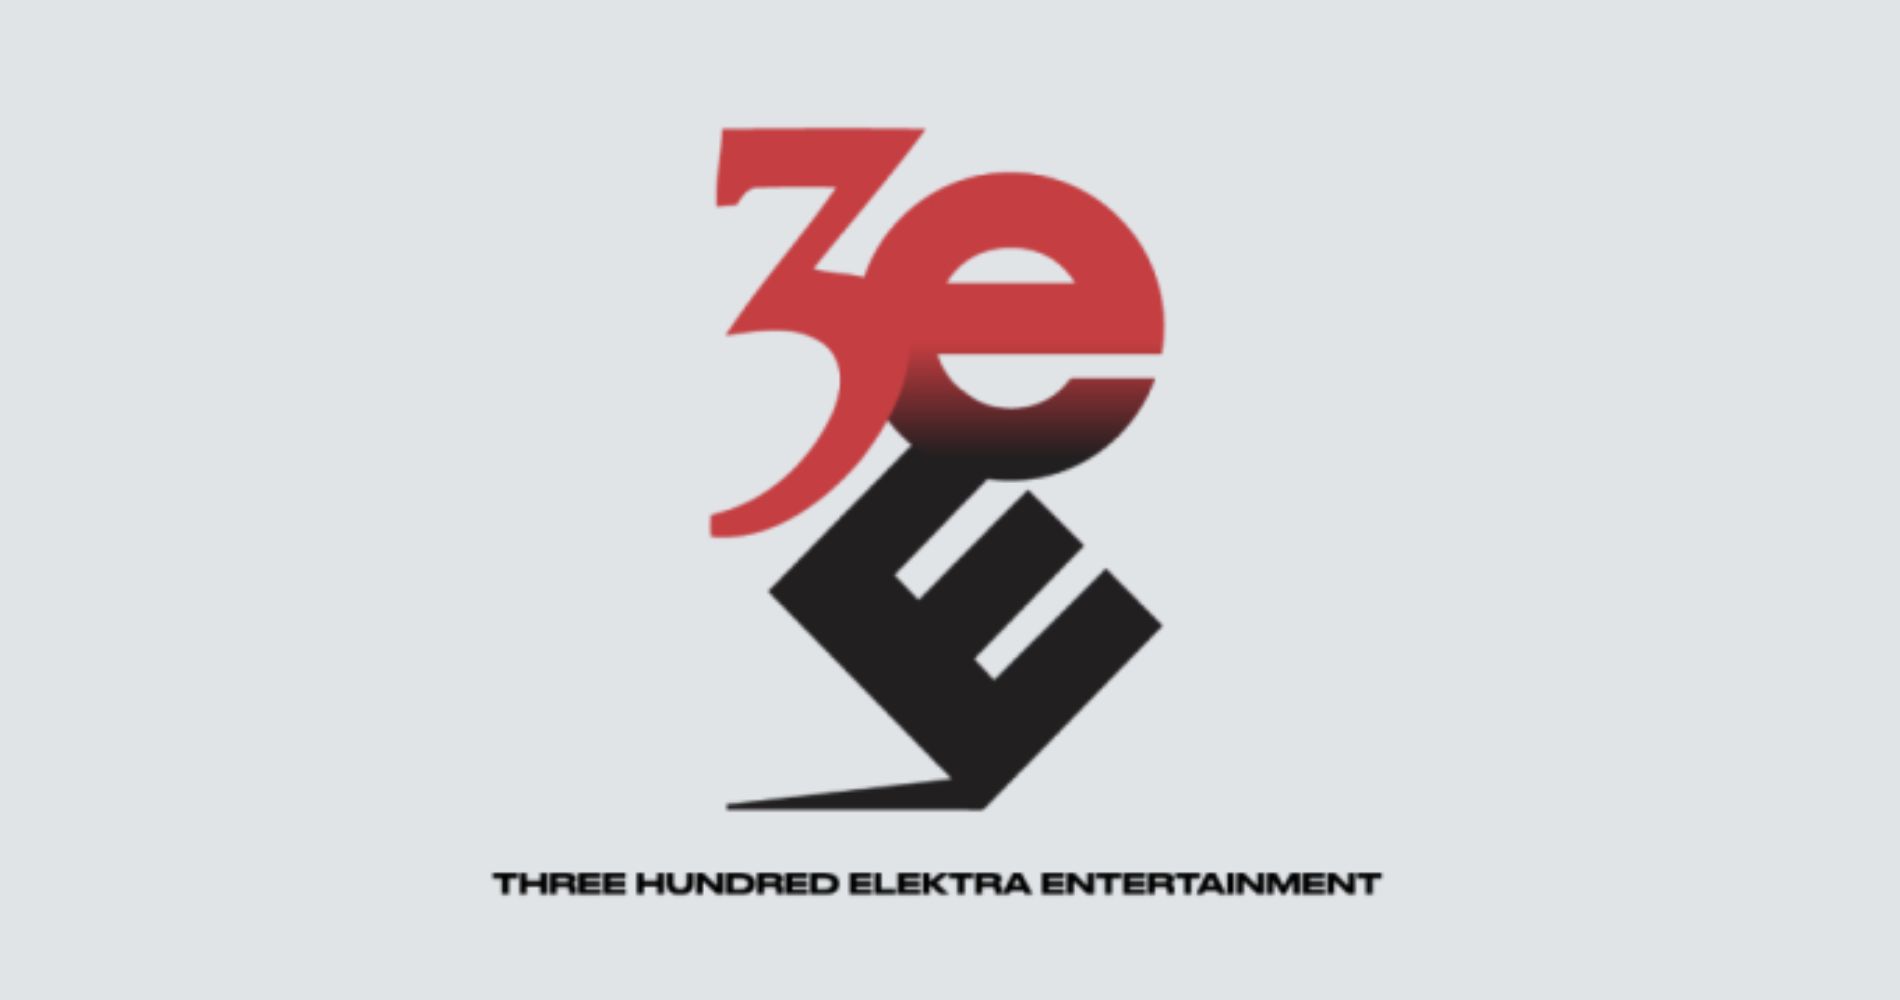 Warner Music Group has announced the creation of 300 Elektra Entertainment – 3EE